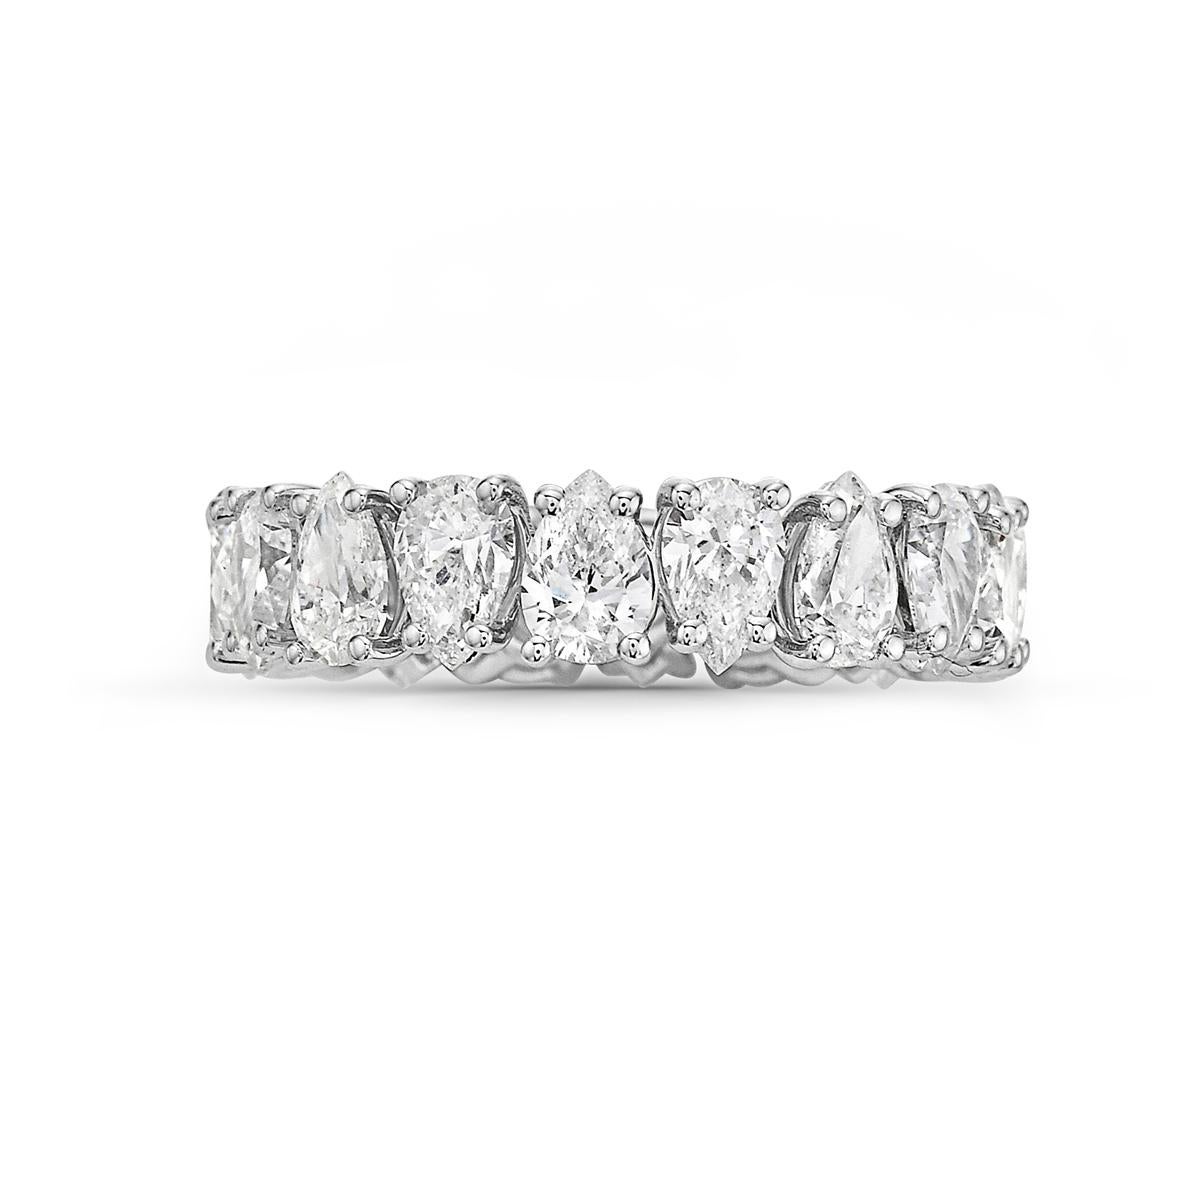 This diamond eternity band features 18 pear shape F VVS diamonds weighing approximately 4.25 carats set in 18k white gold. Size 5. 